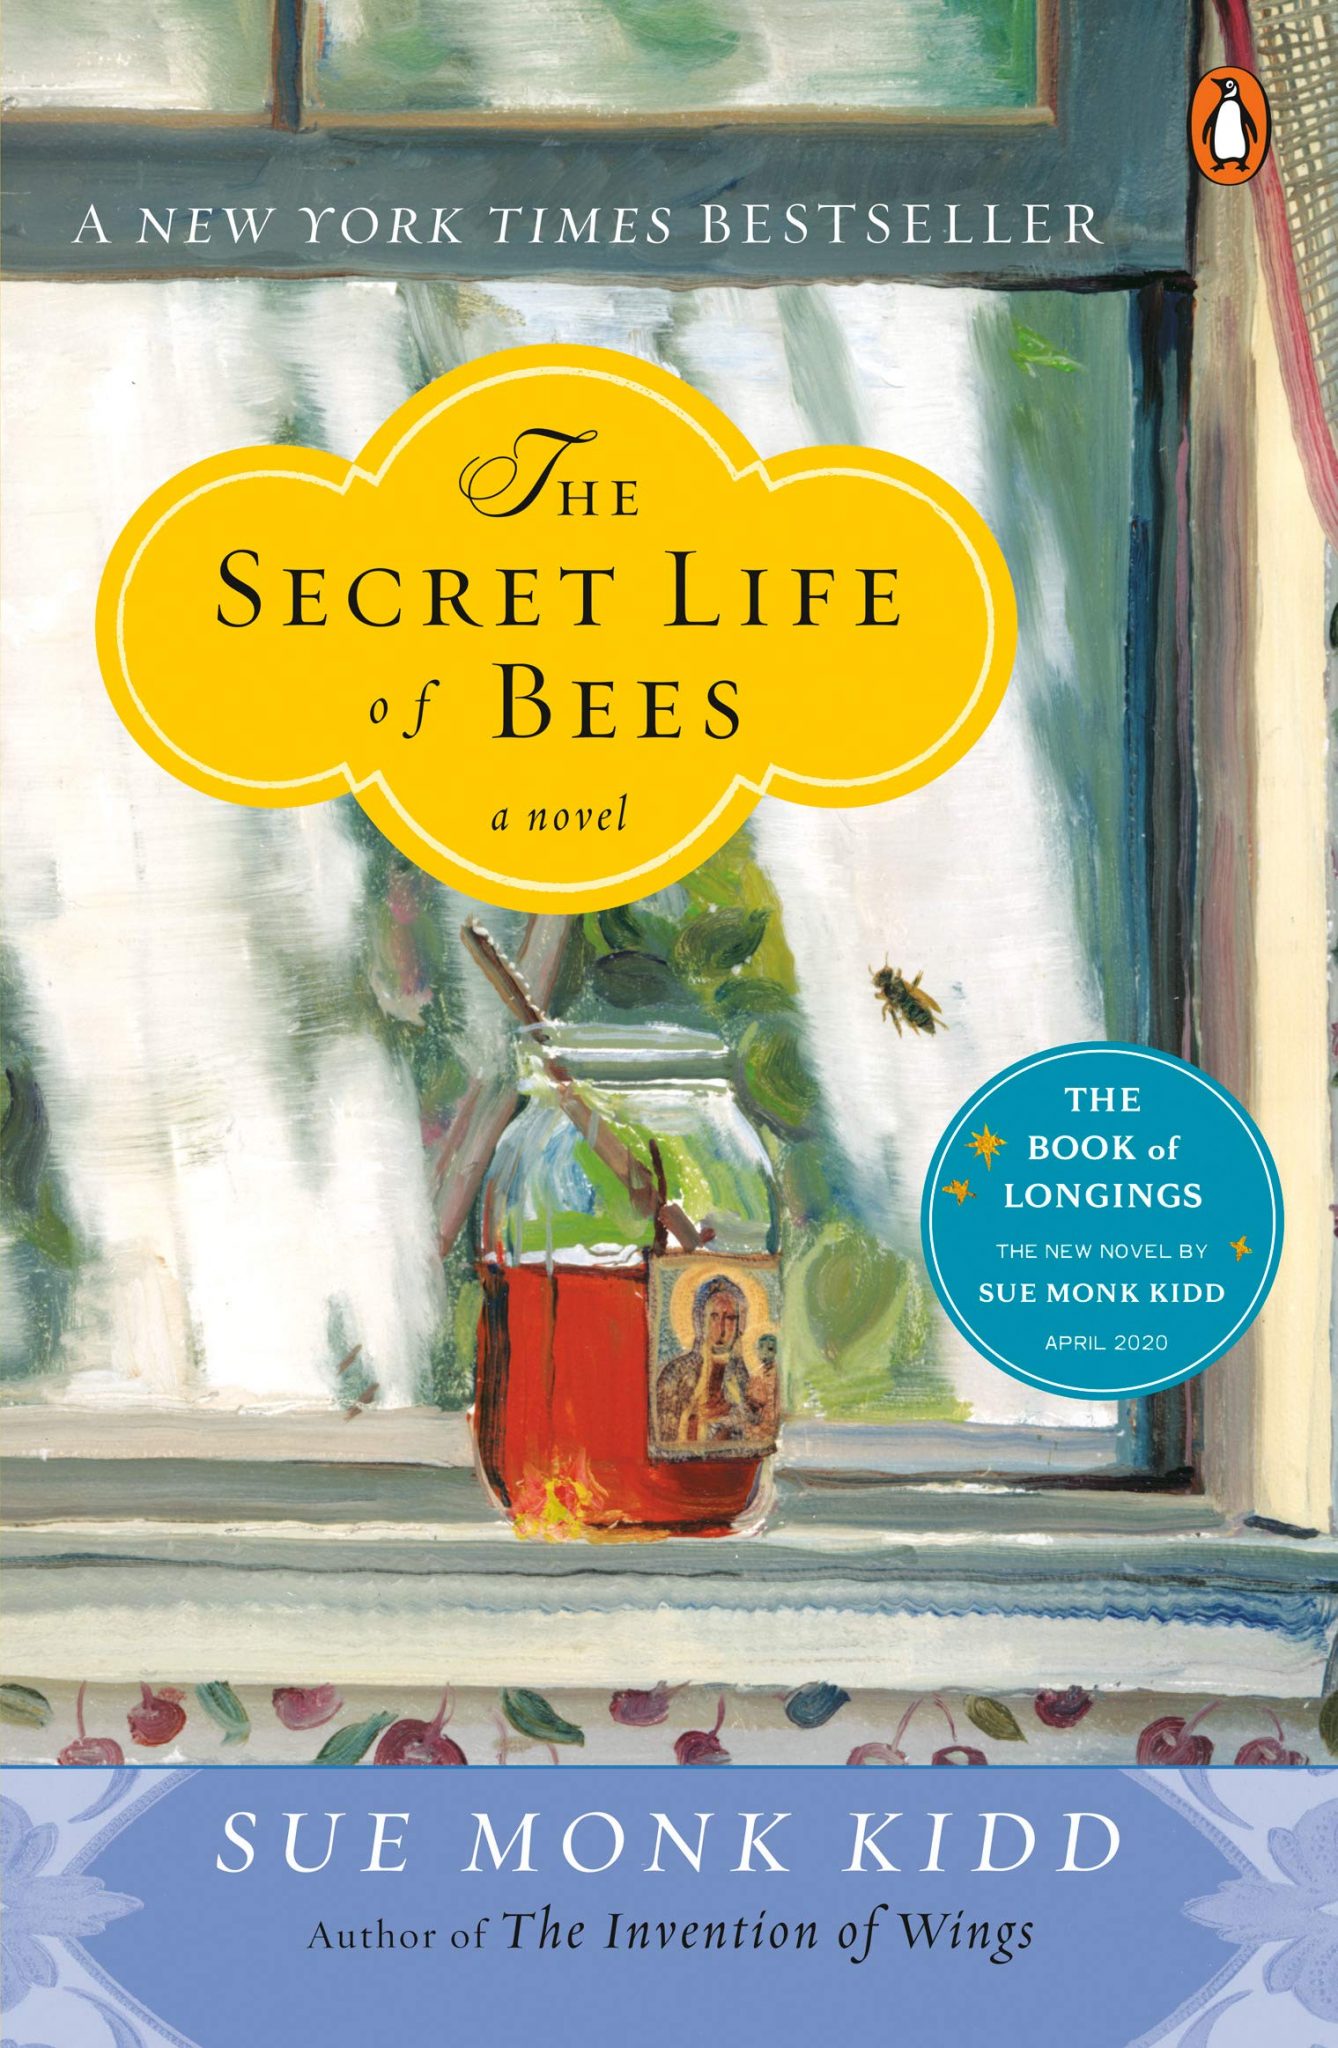 book review of the secret life of bees